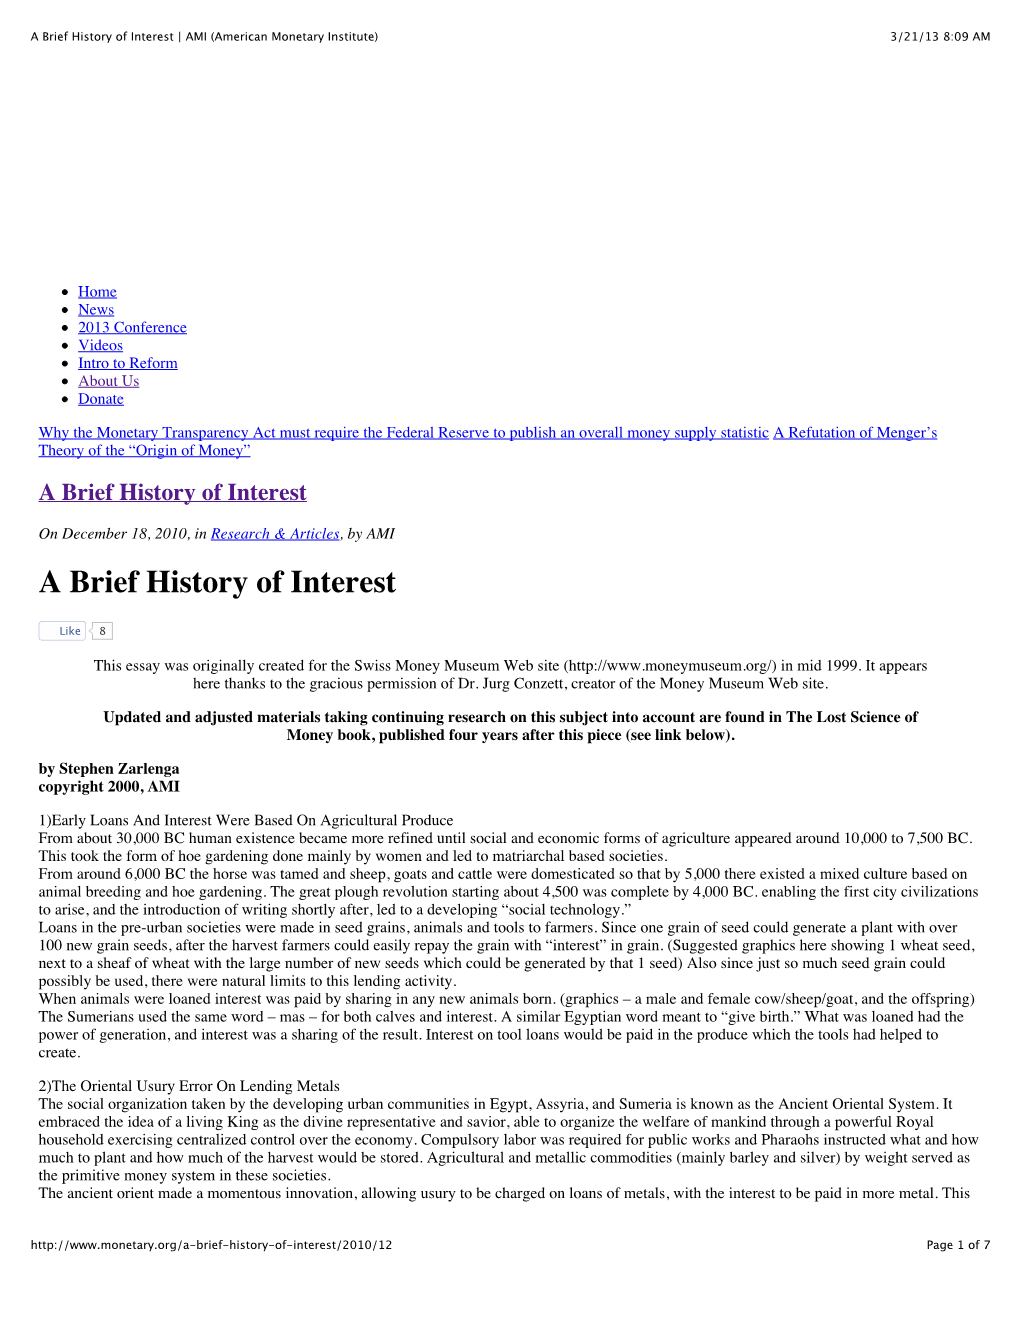 A Brief History of Interest | AMI (American Monetary Institute) 3/21/13 8:09 AM